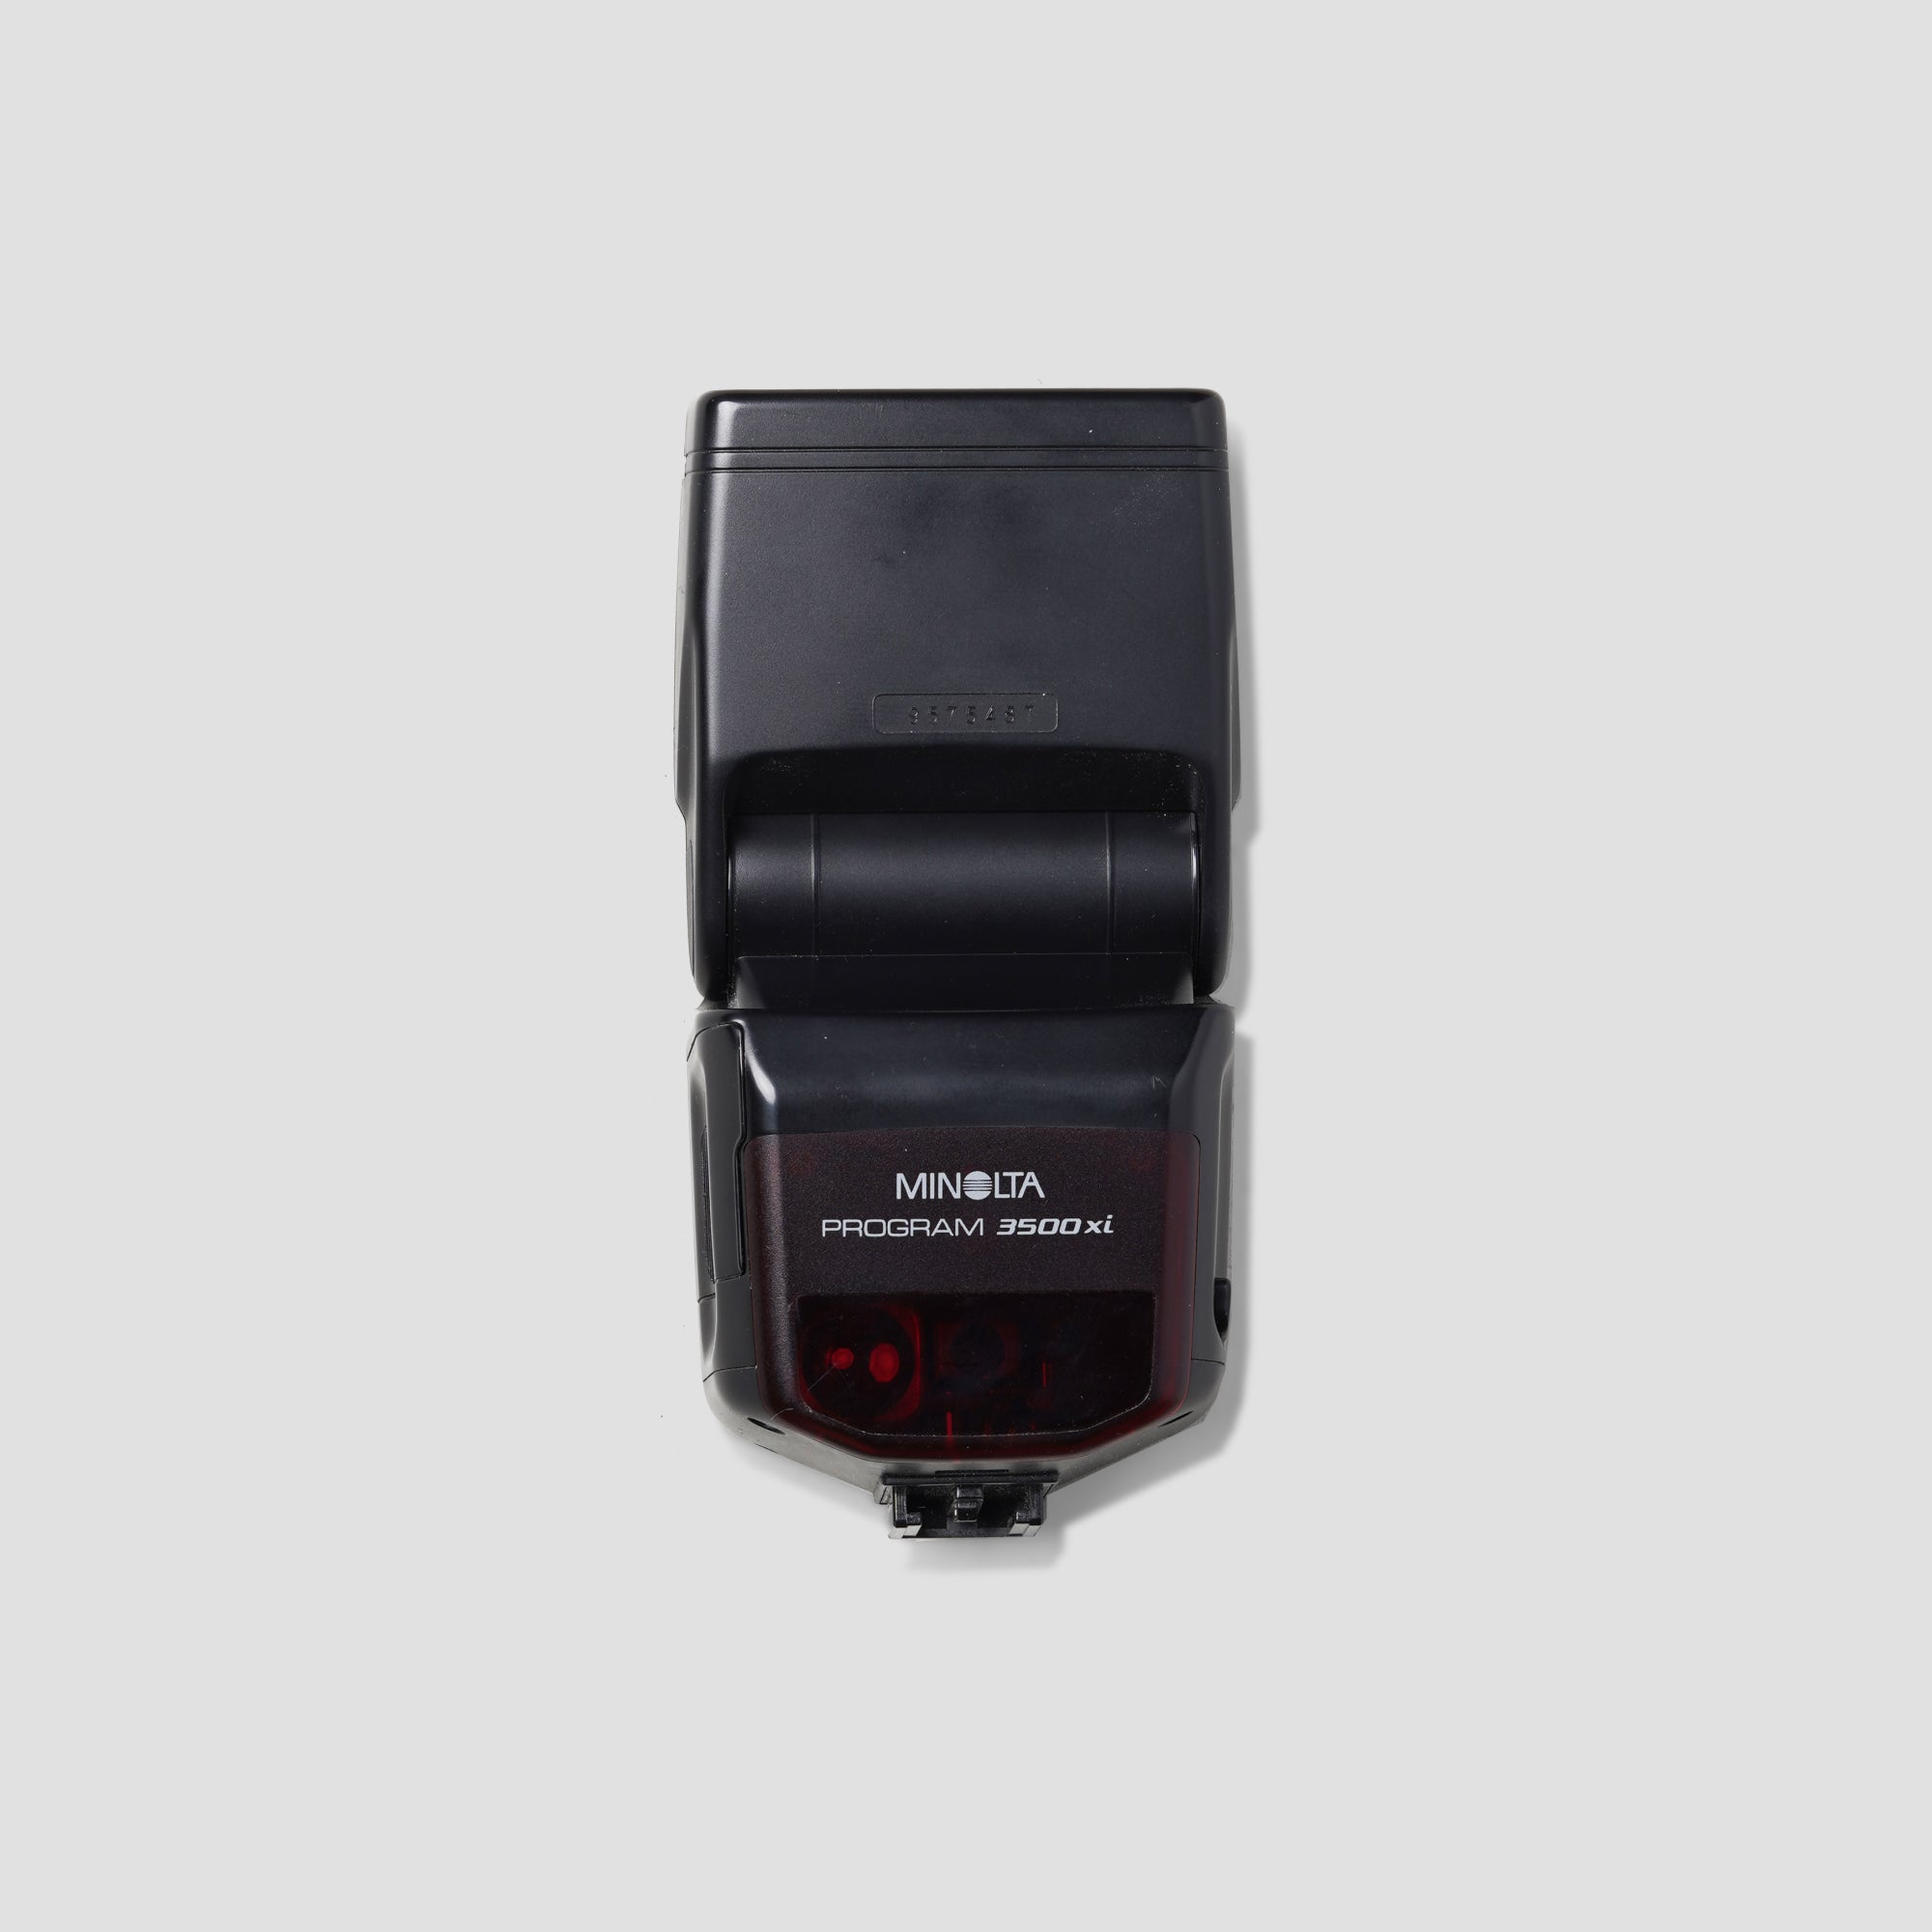 Buy Minolta Dynax 500si now at Analogue Amsterdam